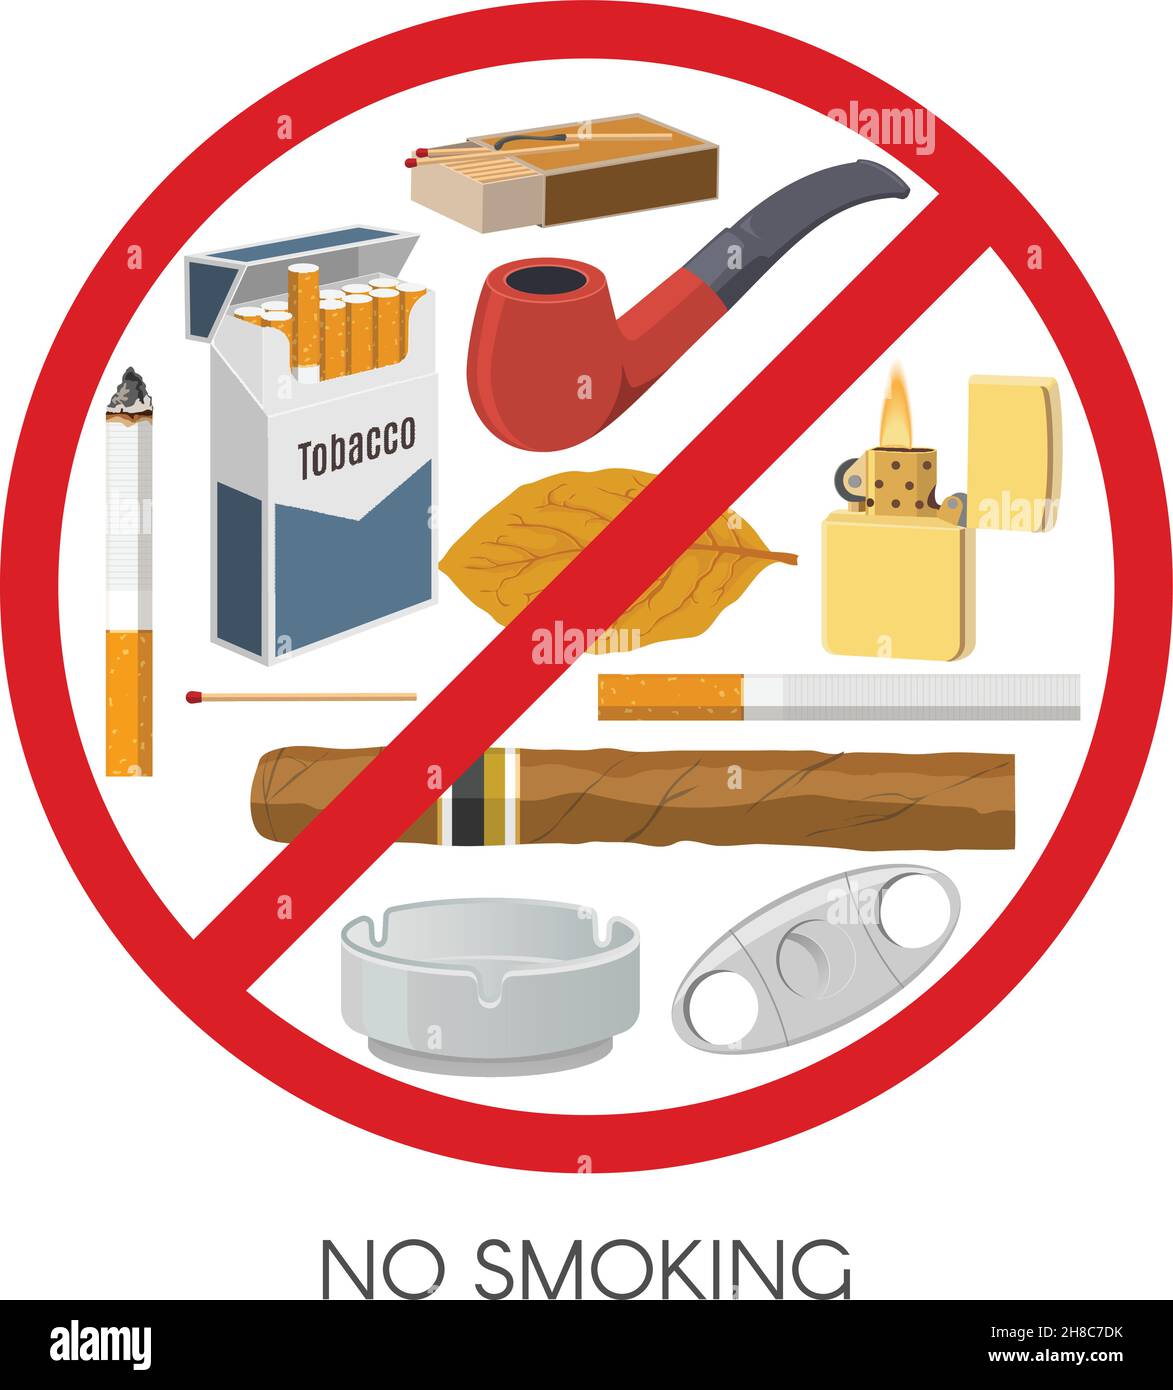 No smoking sign design with tobacco products and accessories inside red prohibitive symbol vector illustration Stock Vector